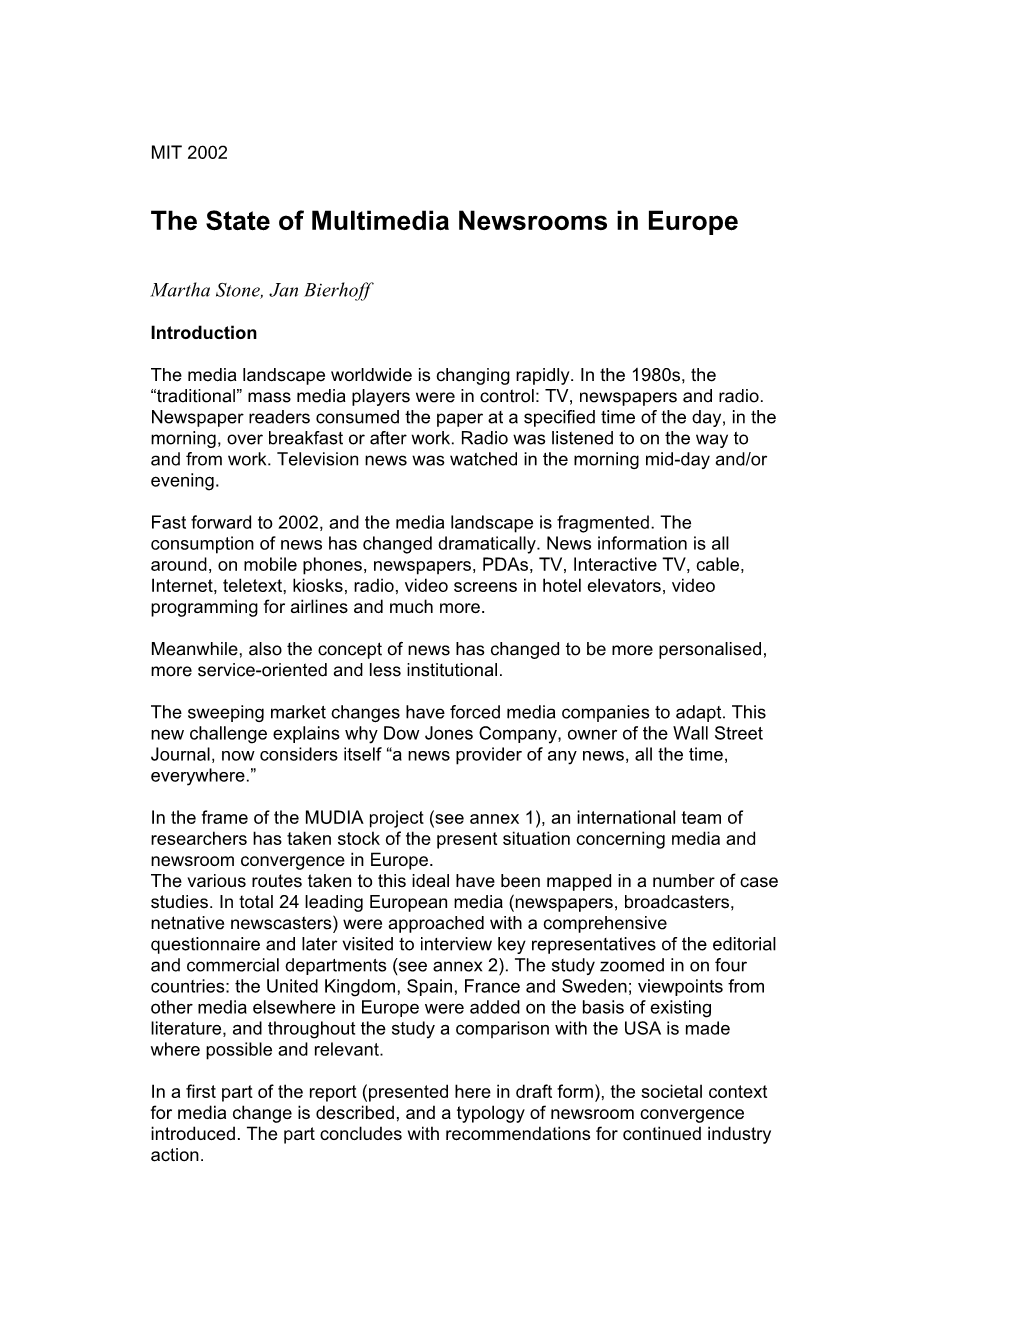 The State of Multimedia Newsrooms in Europe